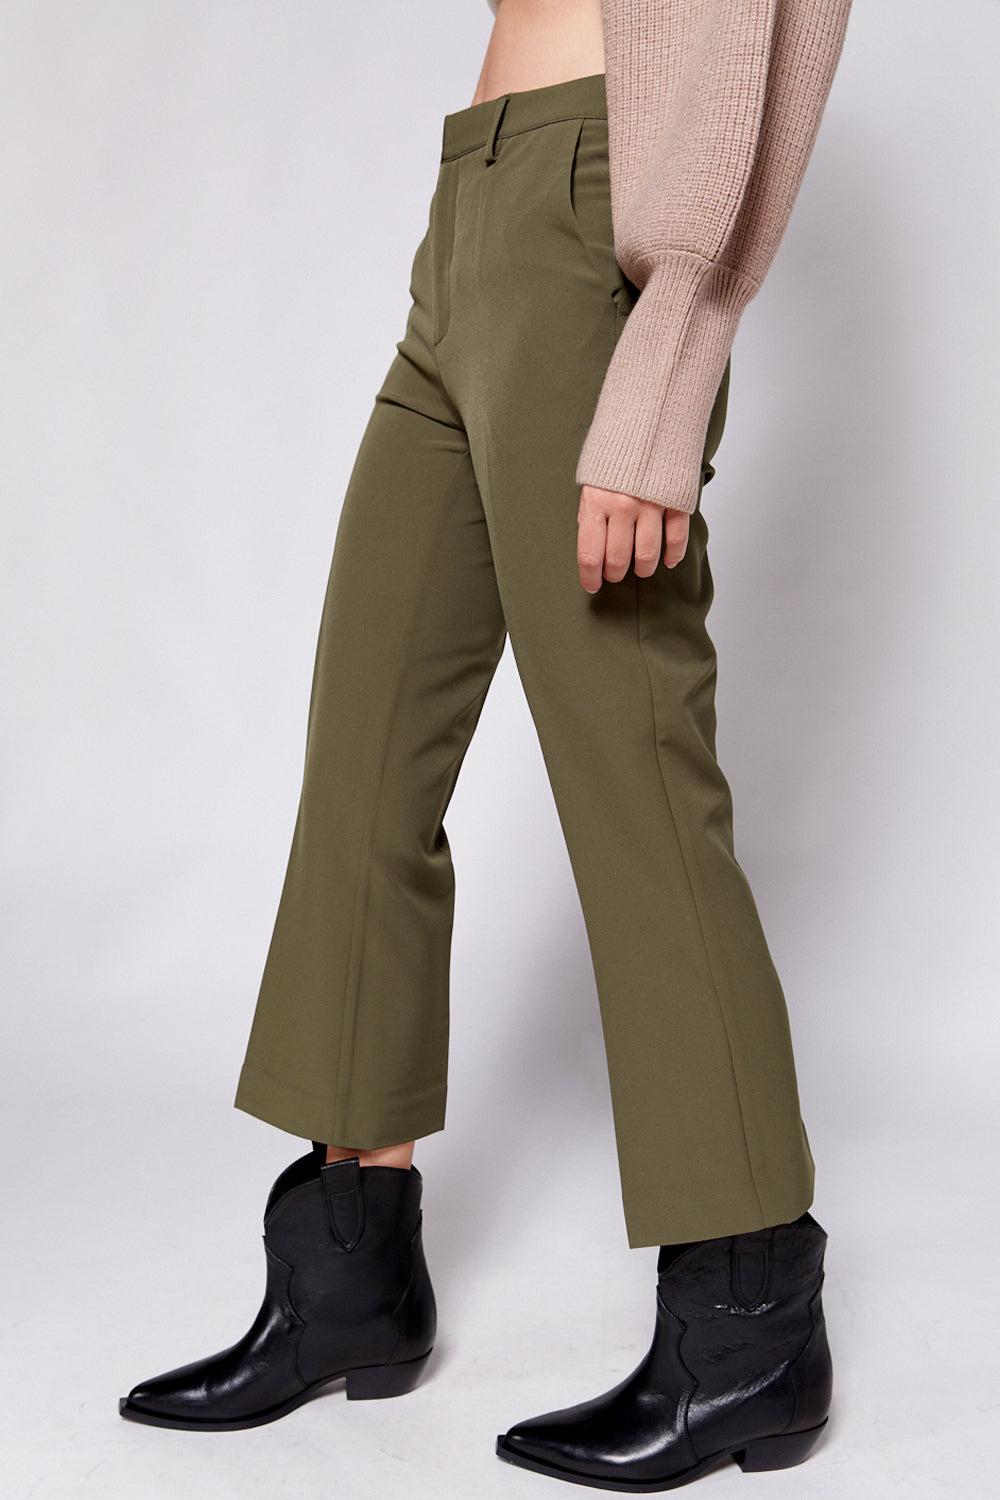 afsked Distribuere tyveri Ichi Lexi Cropped Pant Ivy Green - Surplustore